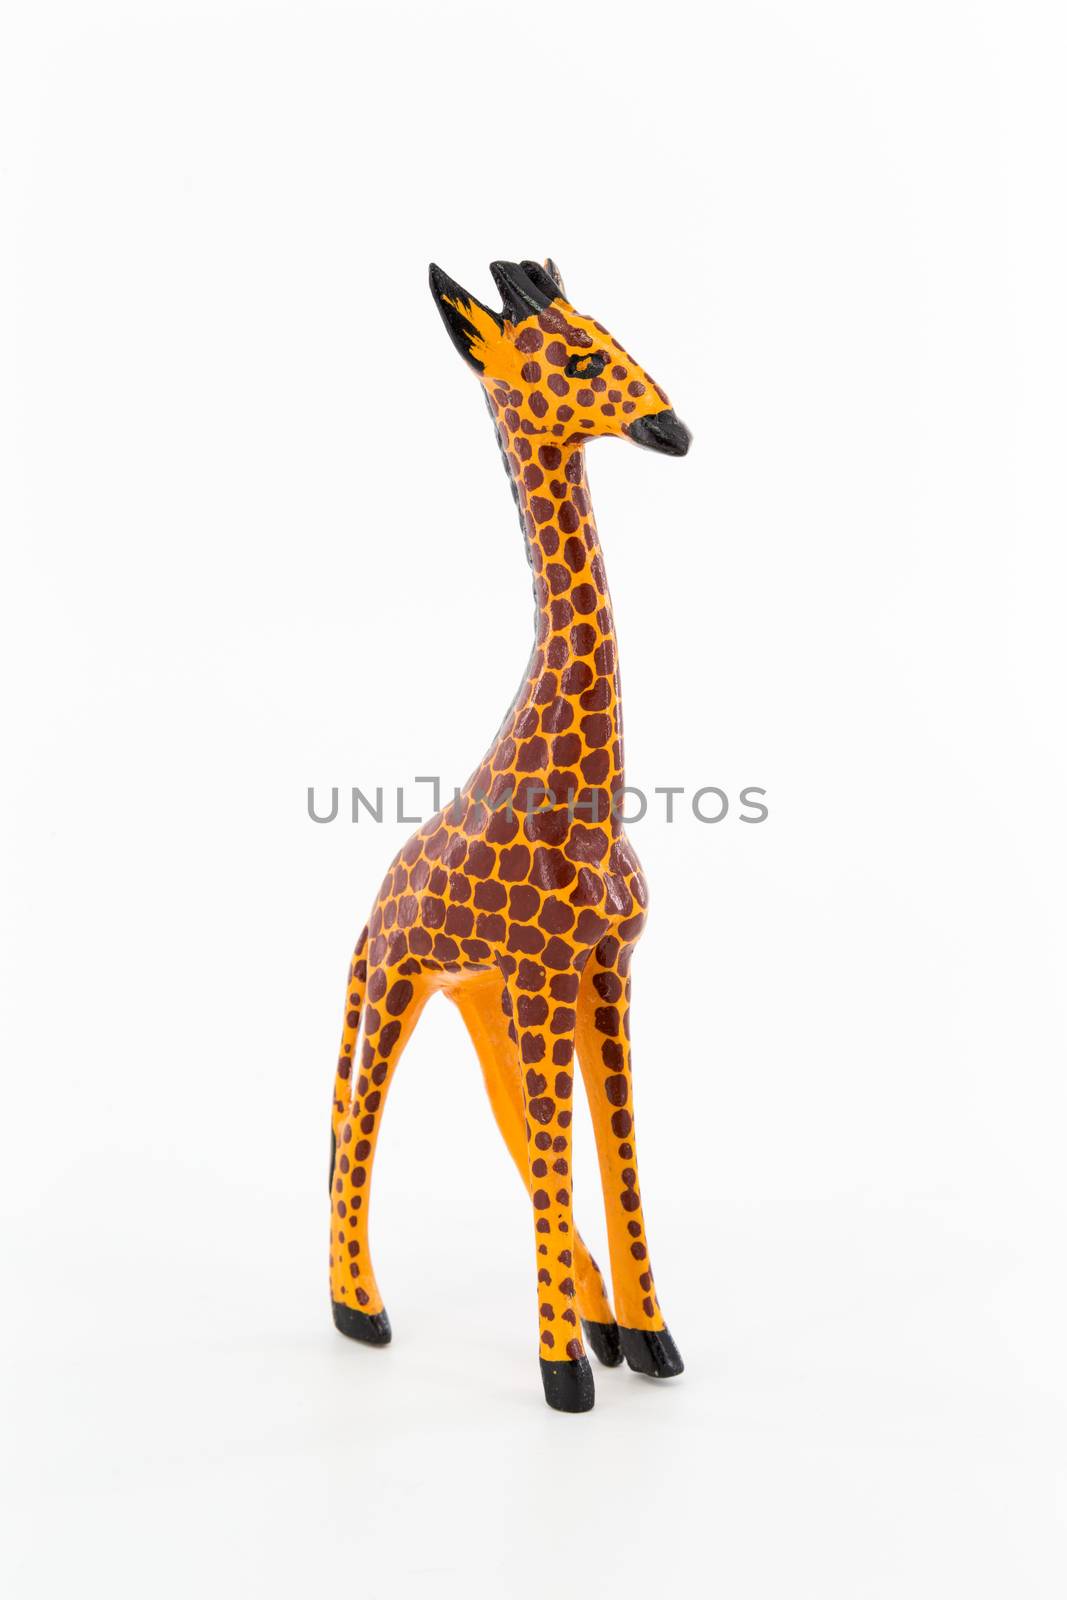 Wooden figure of a giraffe on white background by 25ehaag6